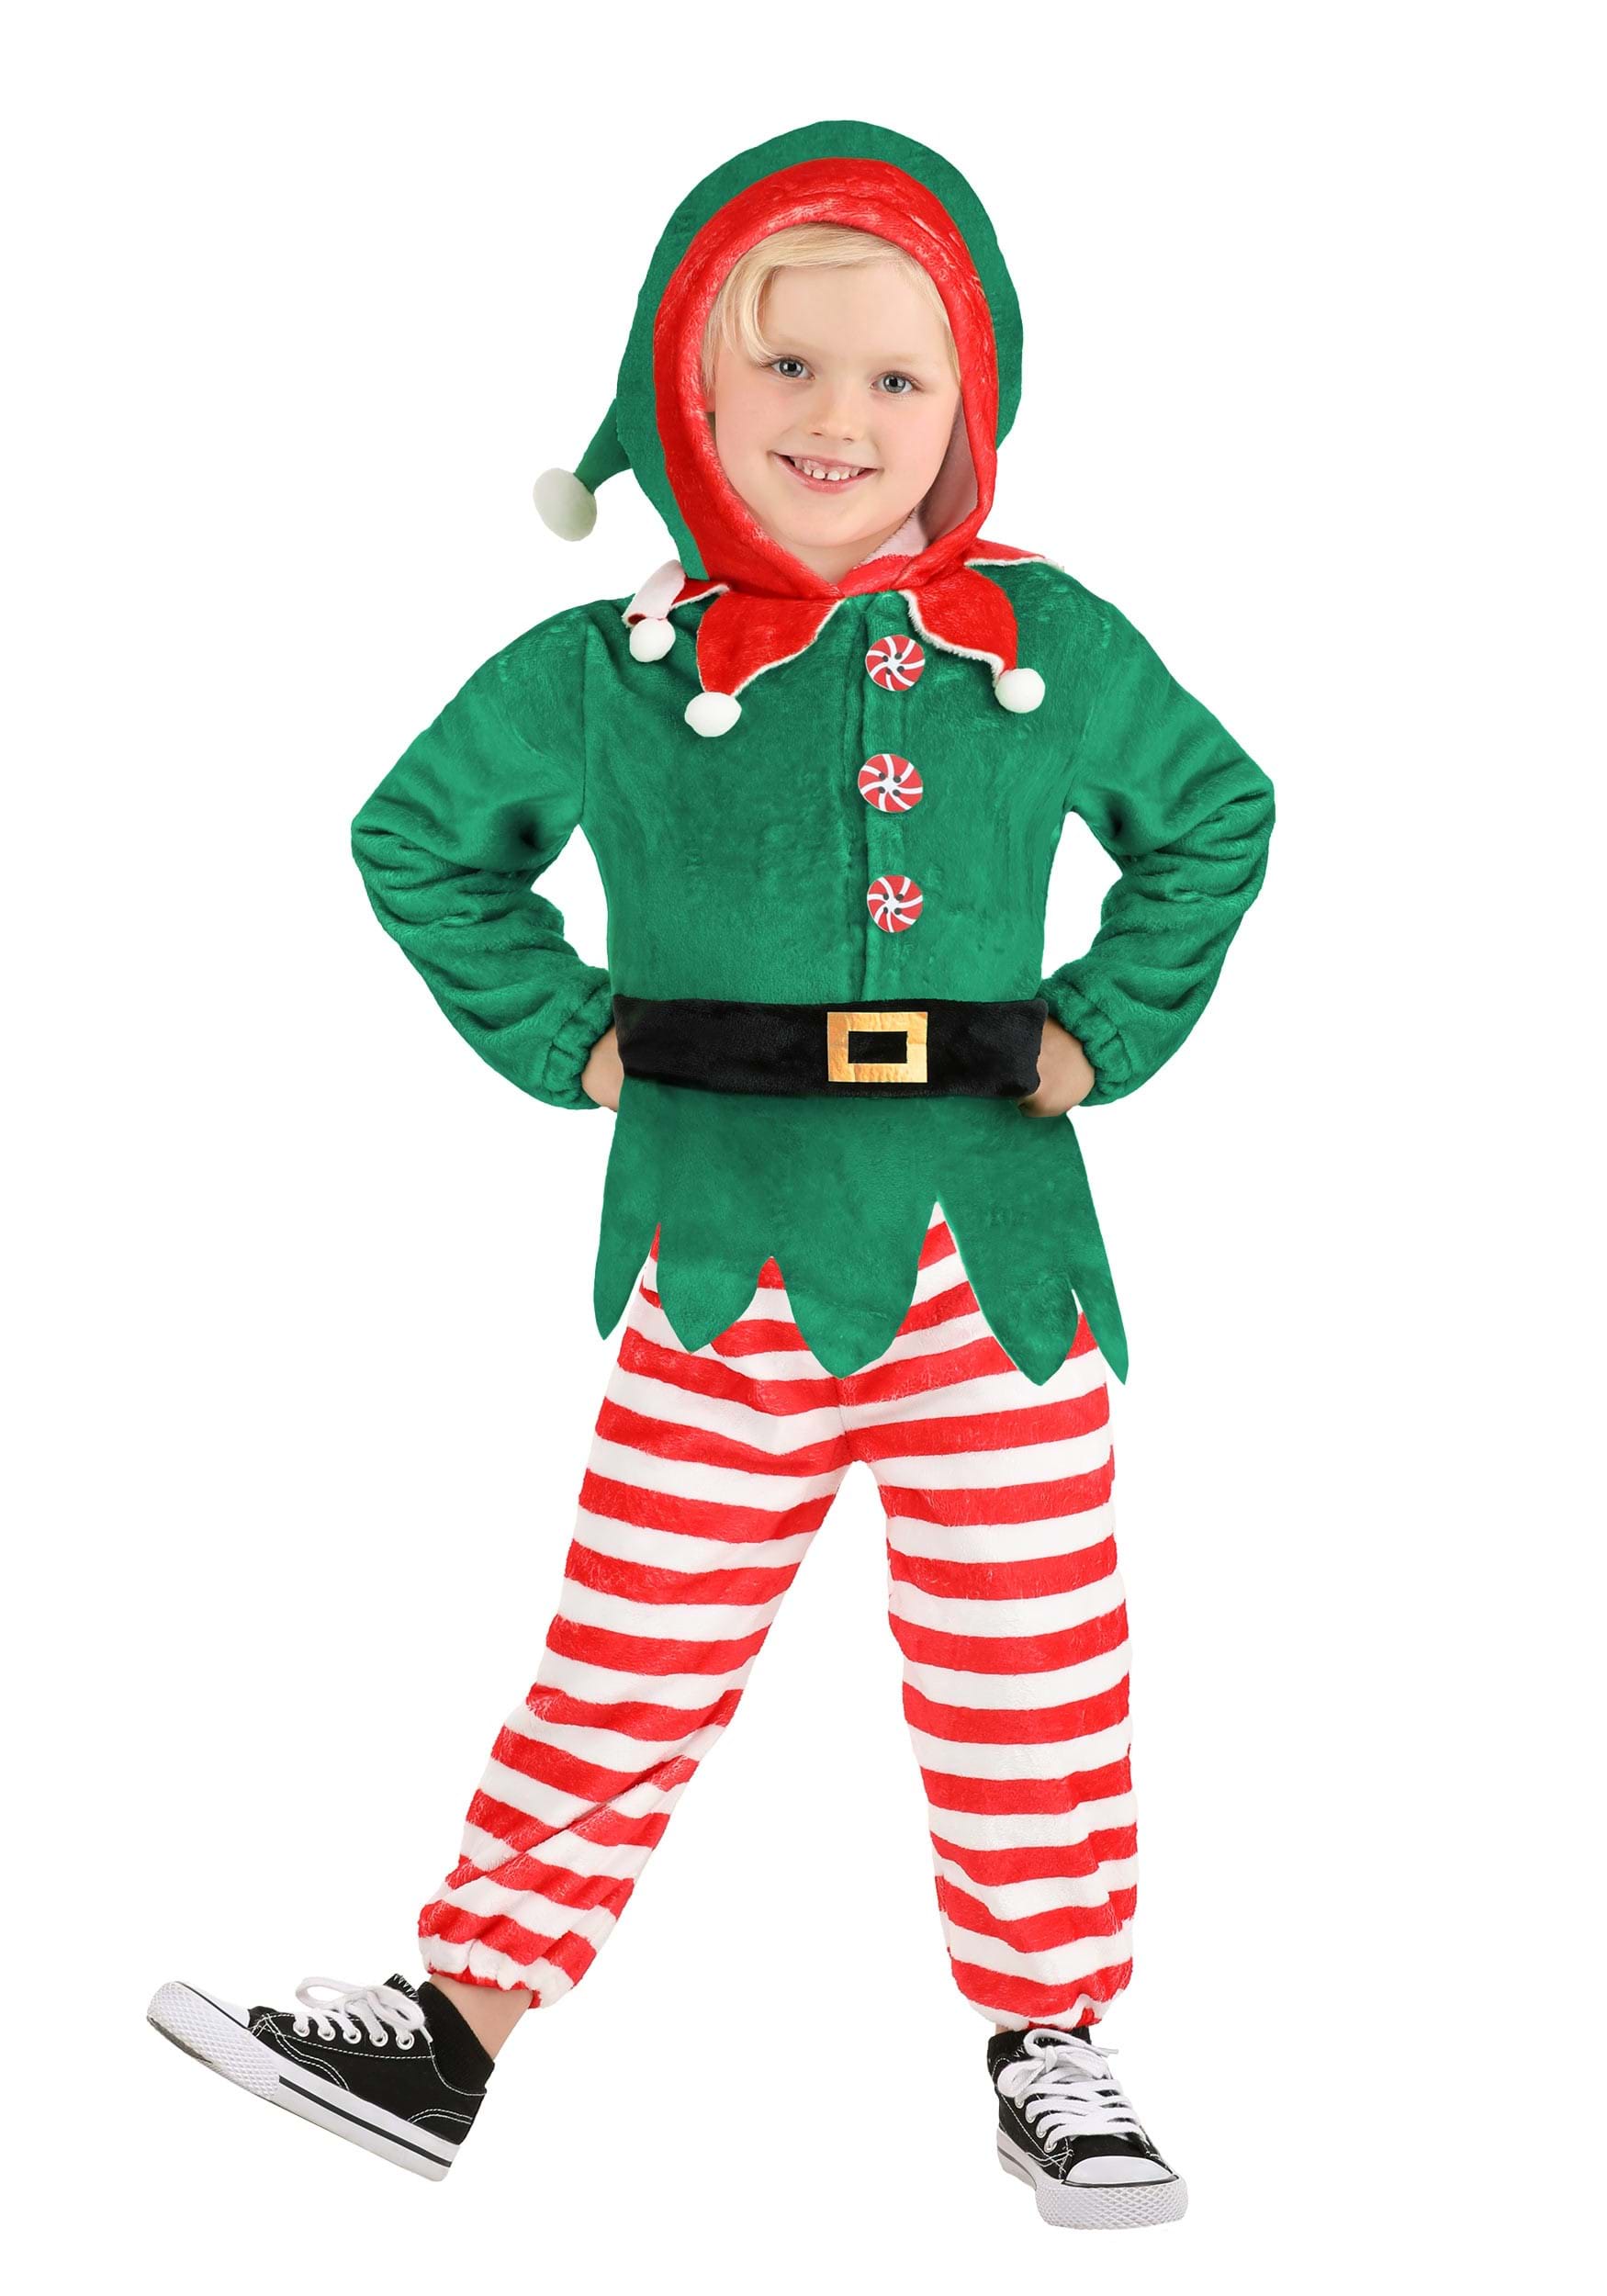 Photos - Fancy Dress ELF FUN Costumes  Jumpsuit Toddler Costume Green/Red/White 